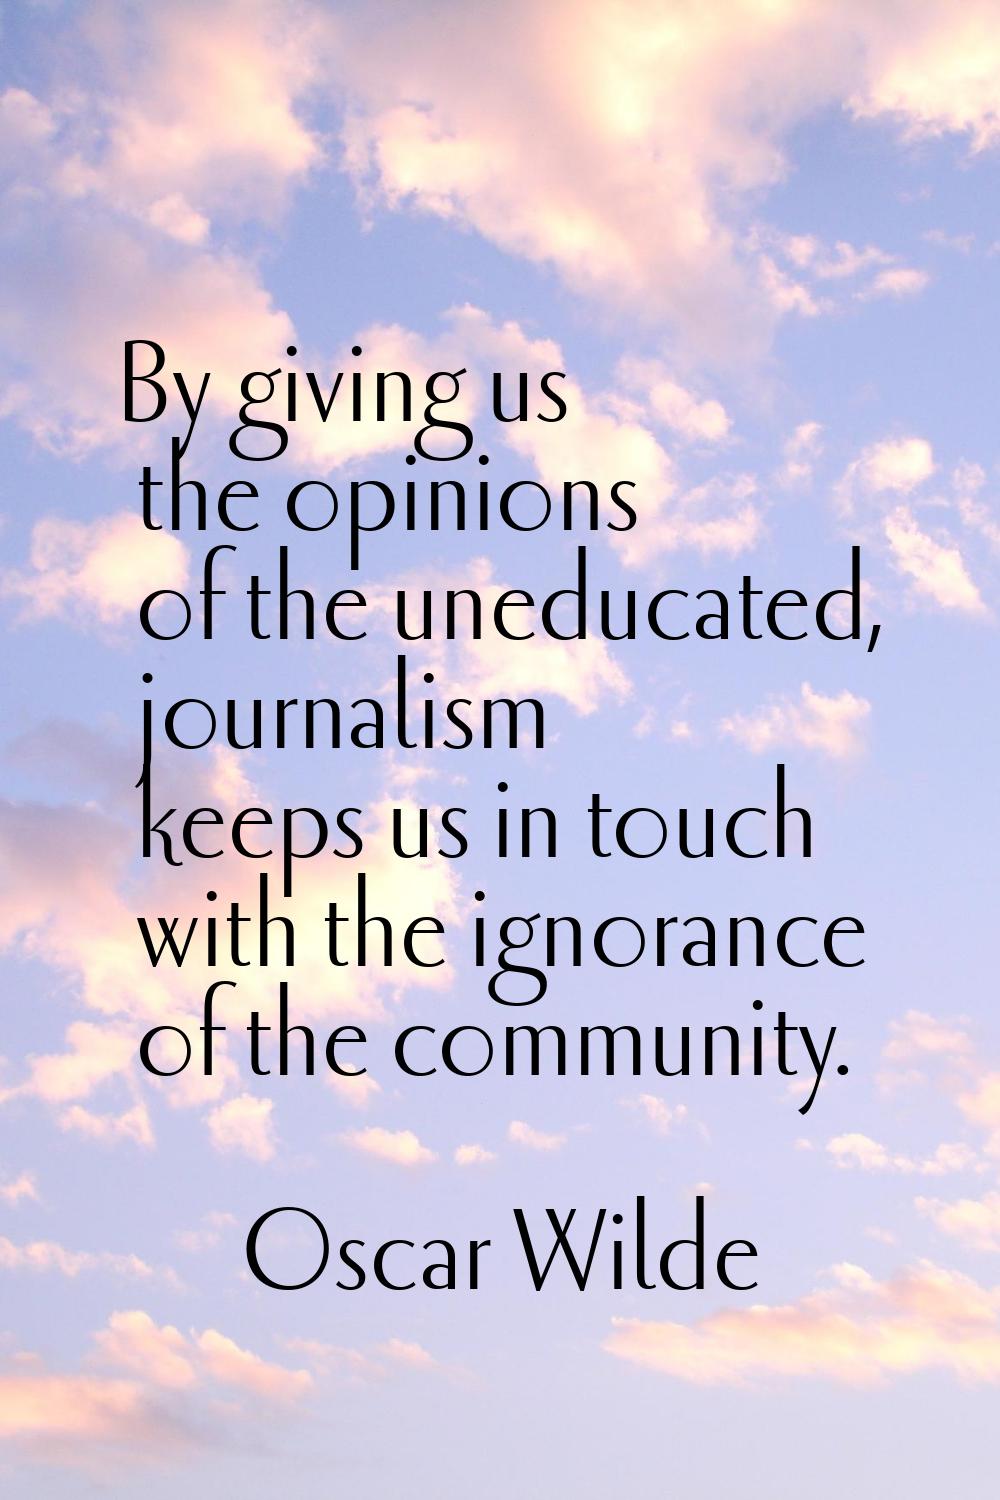 By giving us the opinions of the uneducated, journalism keeps us in touch with the ignorance of the